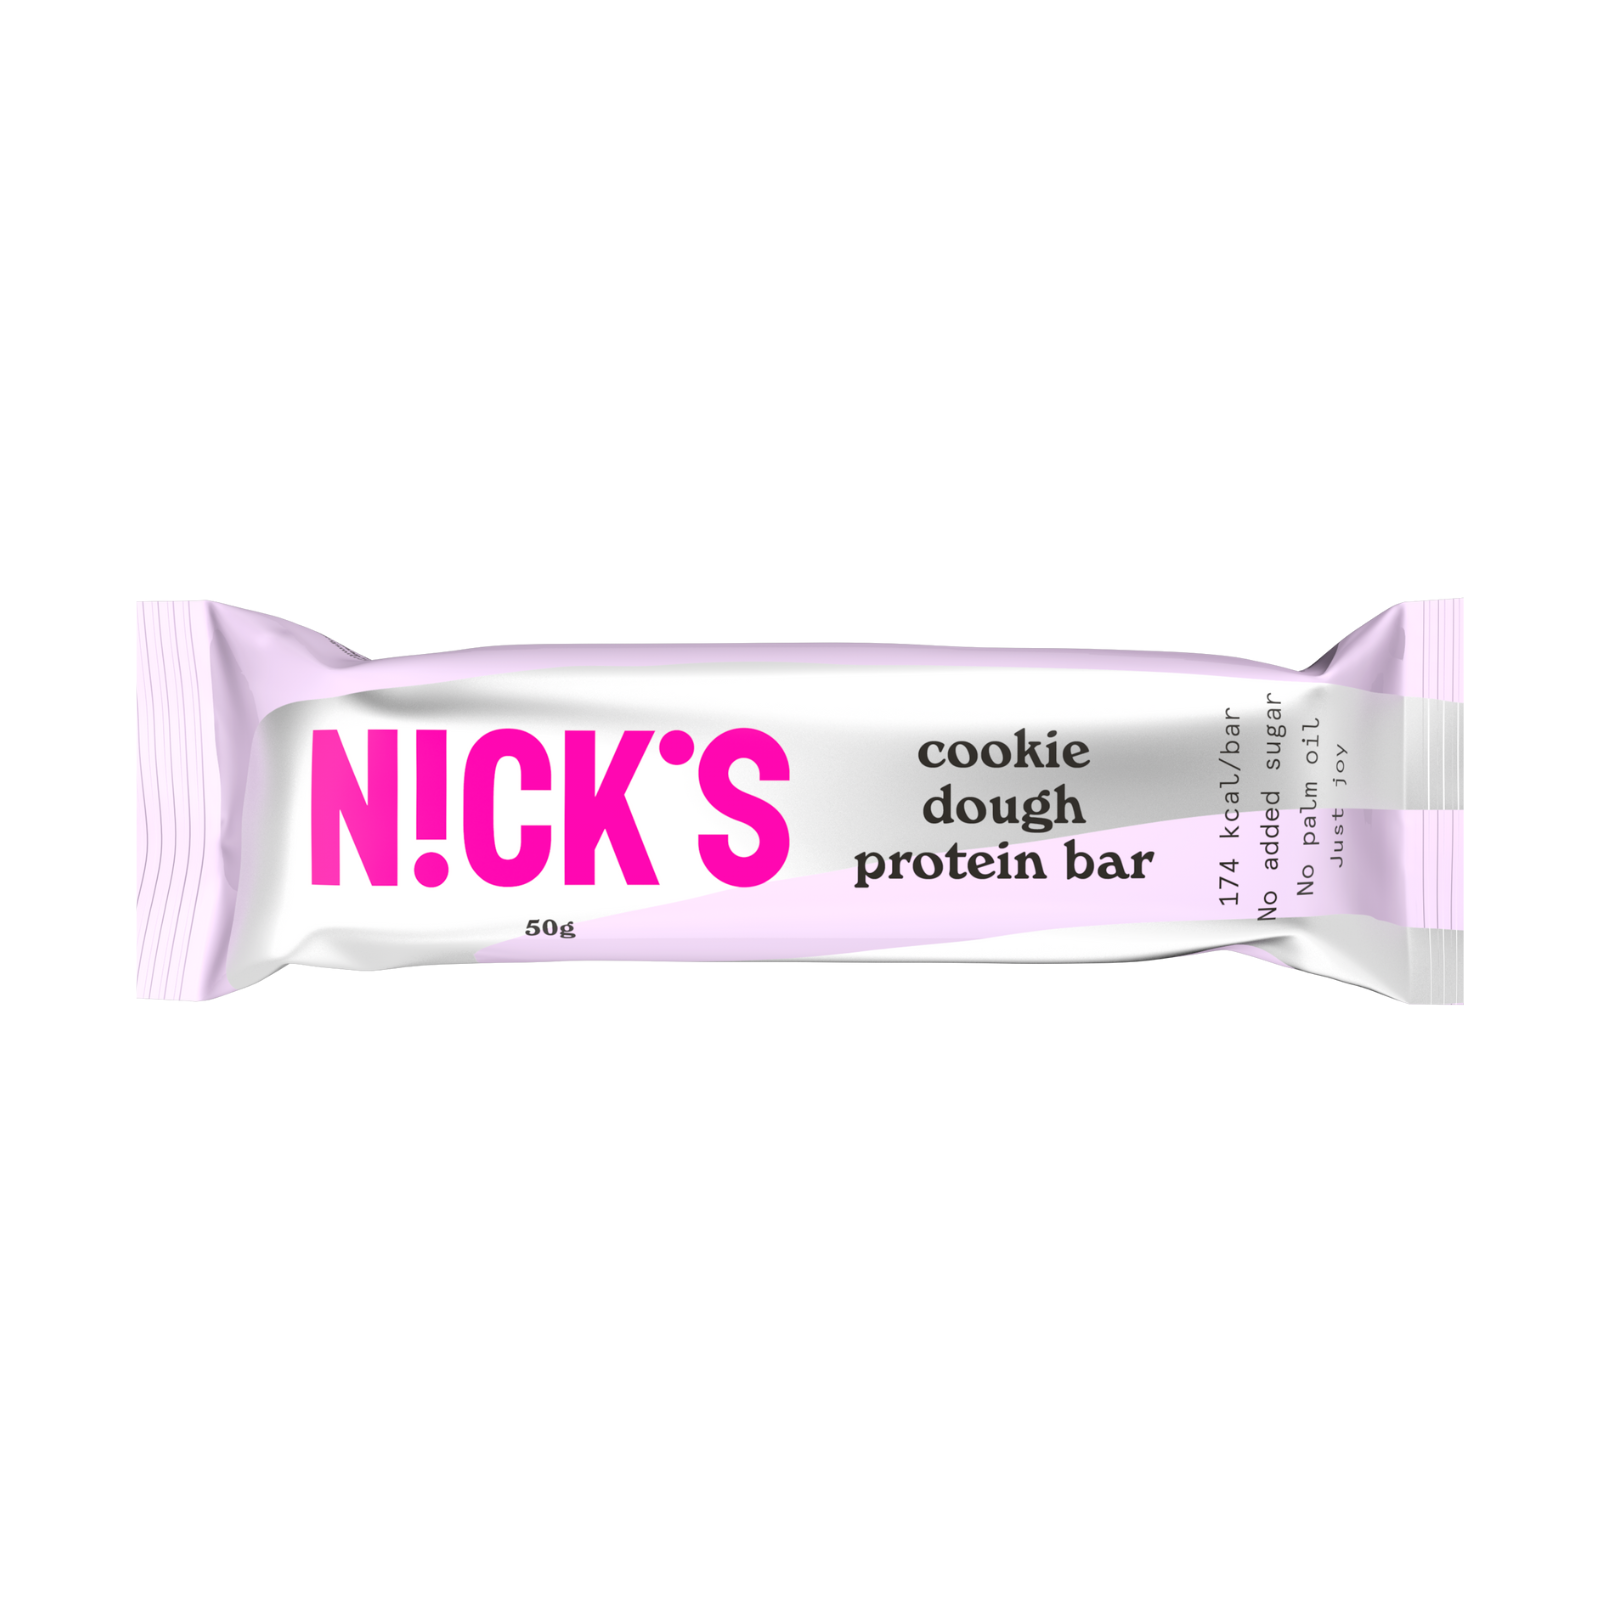 Nick's Protein bar cookie dough